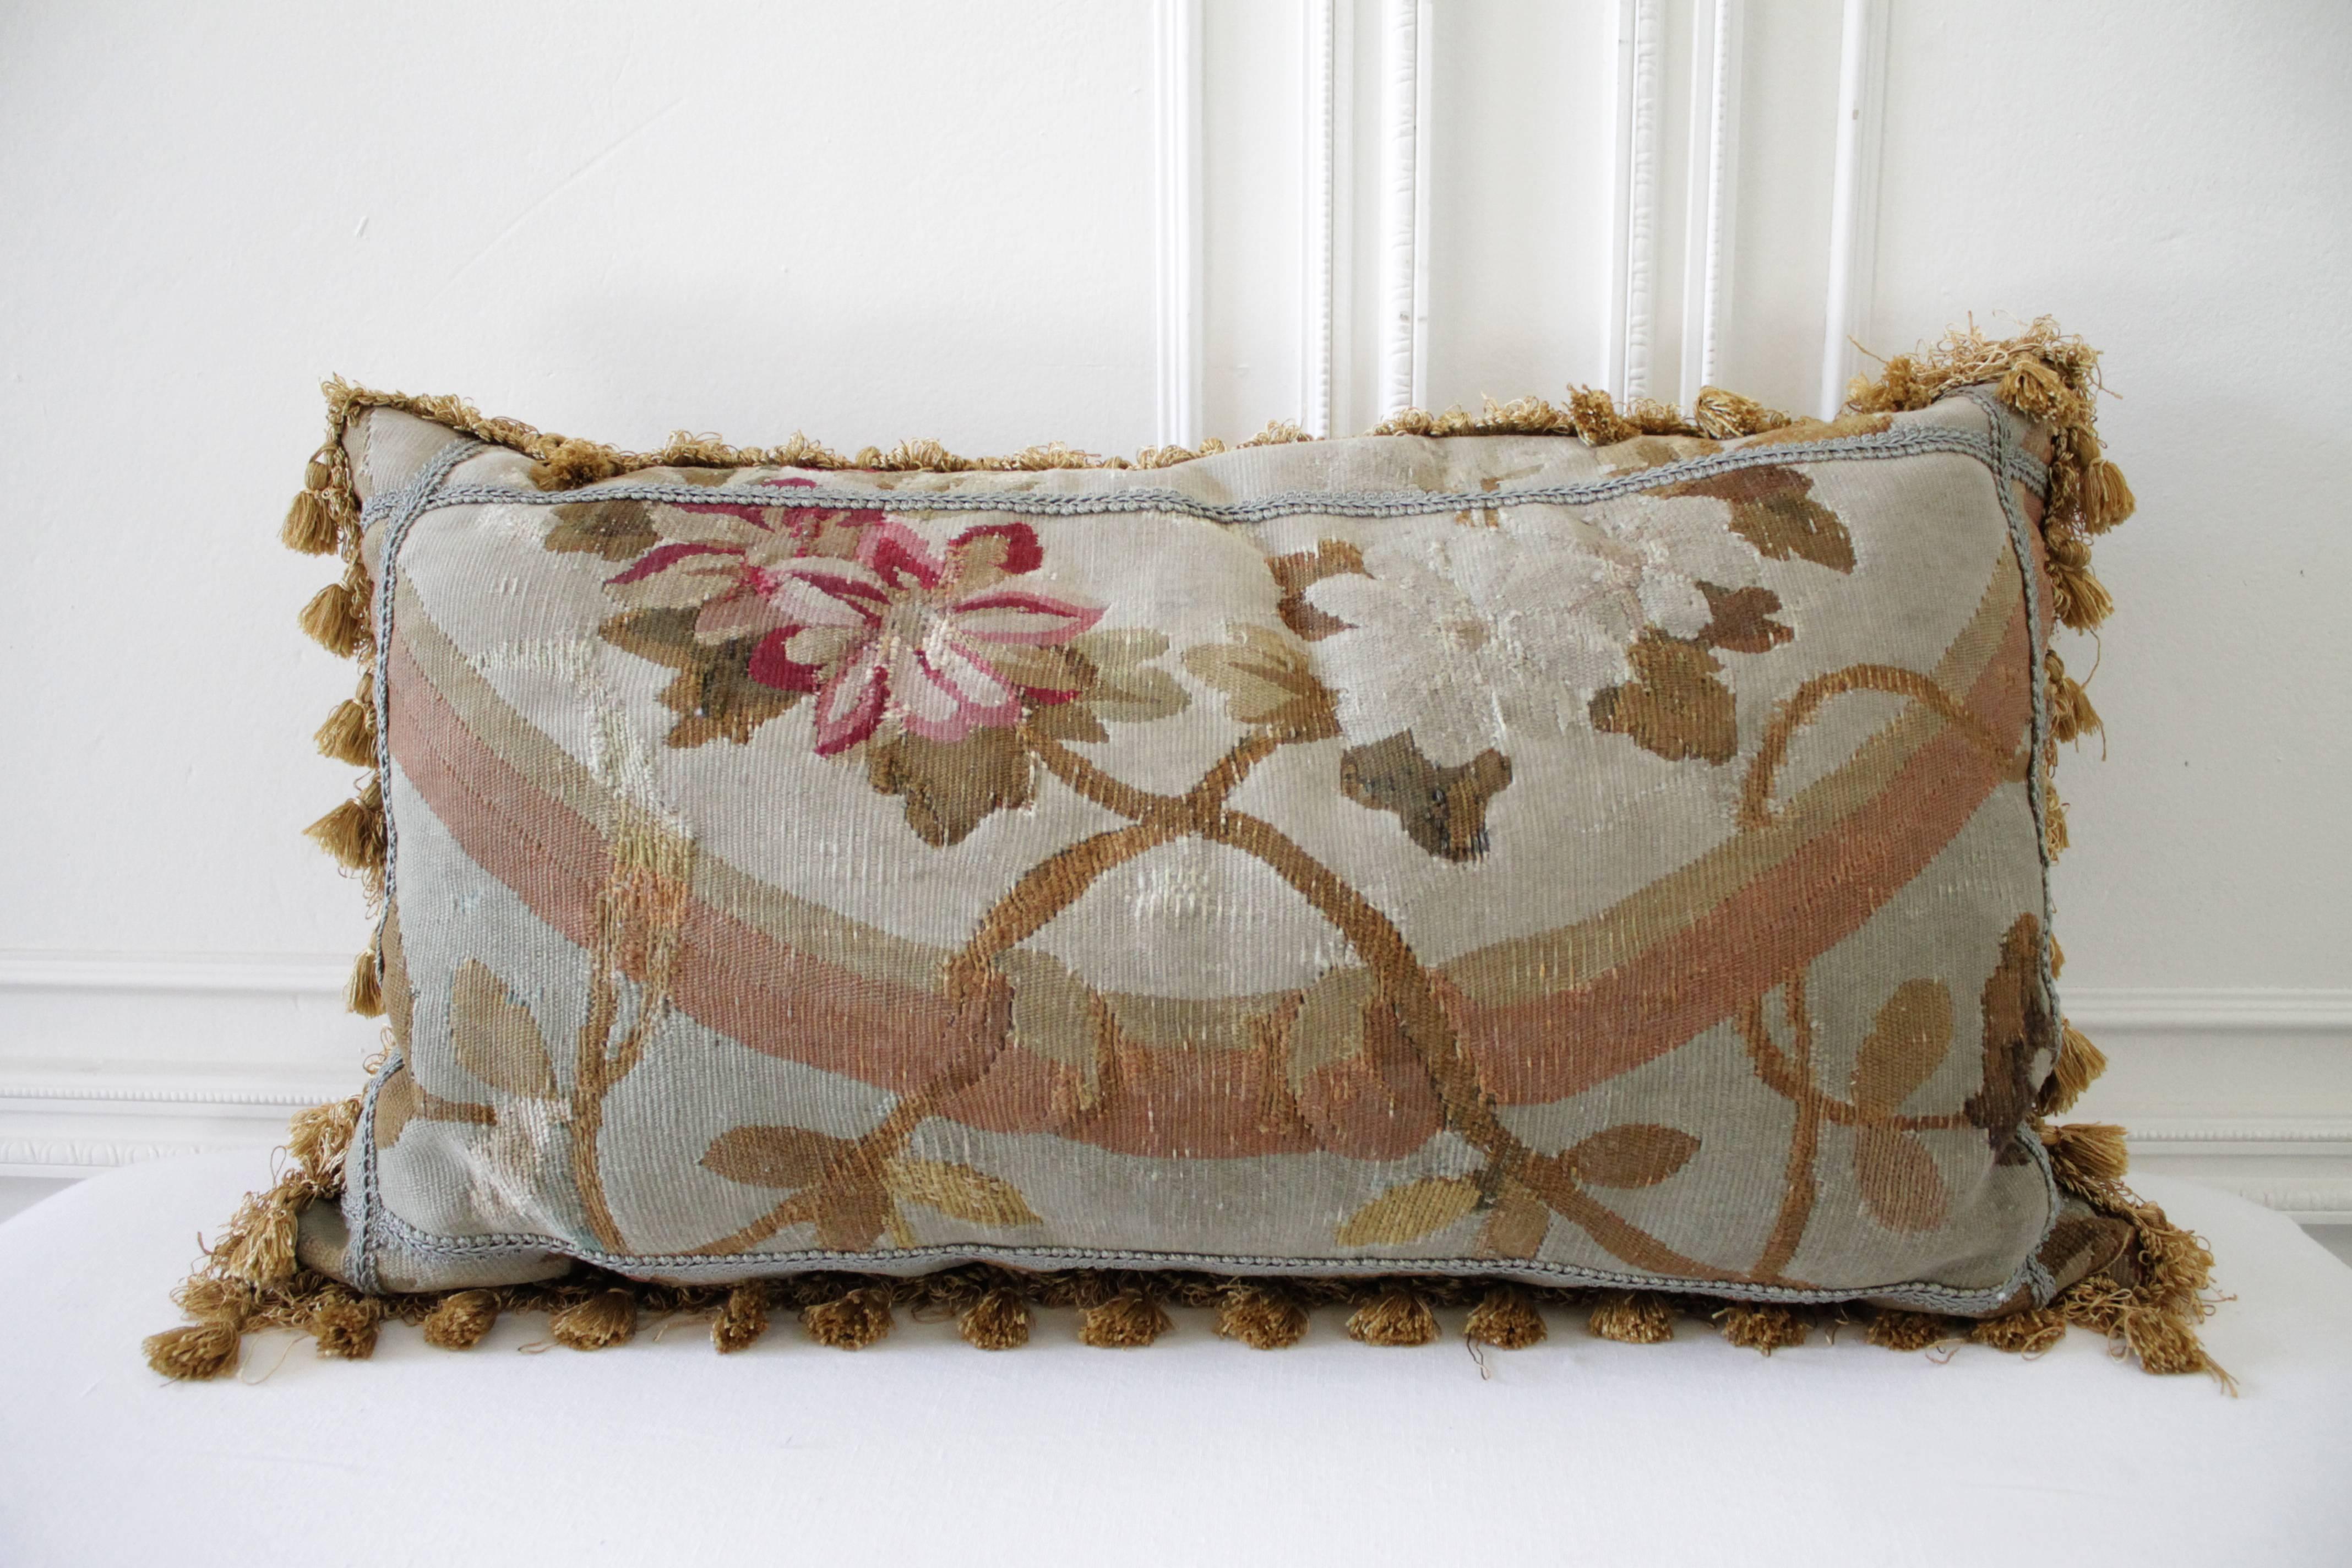 Gorgeous pair of antique pillows in a soft pale grey, tones of pale French blues, faded bronze, creams and red. Finished on the backside with a dark bronze brown velvet and trimmed with golden tassel.
Signs of age lightly faded on parts of the